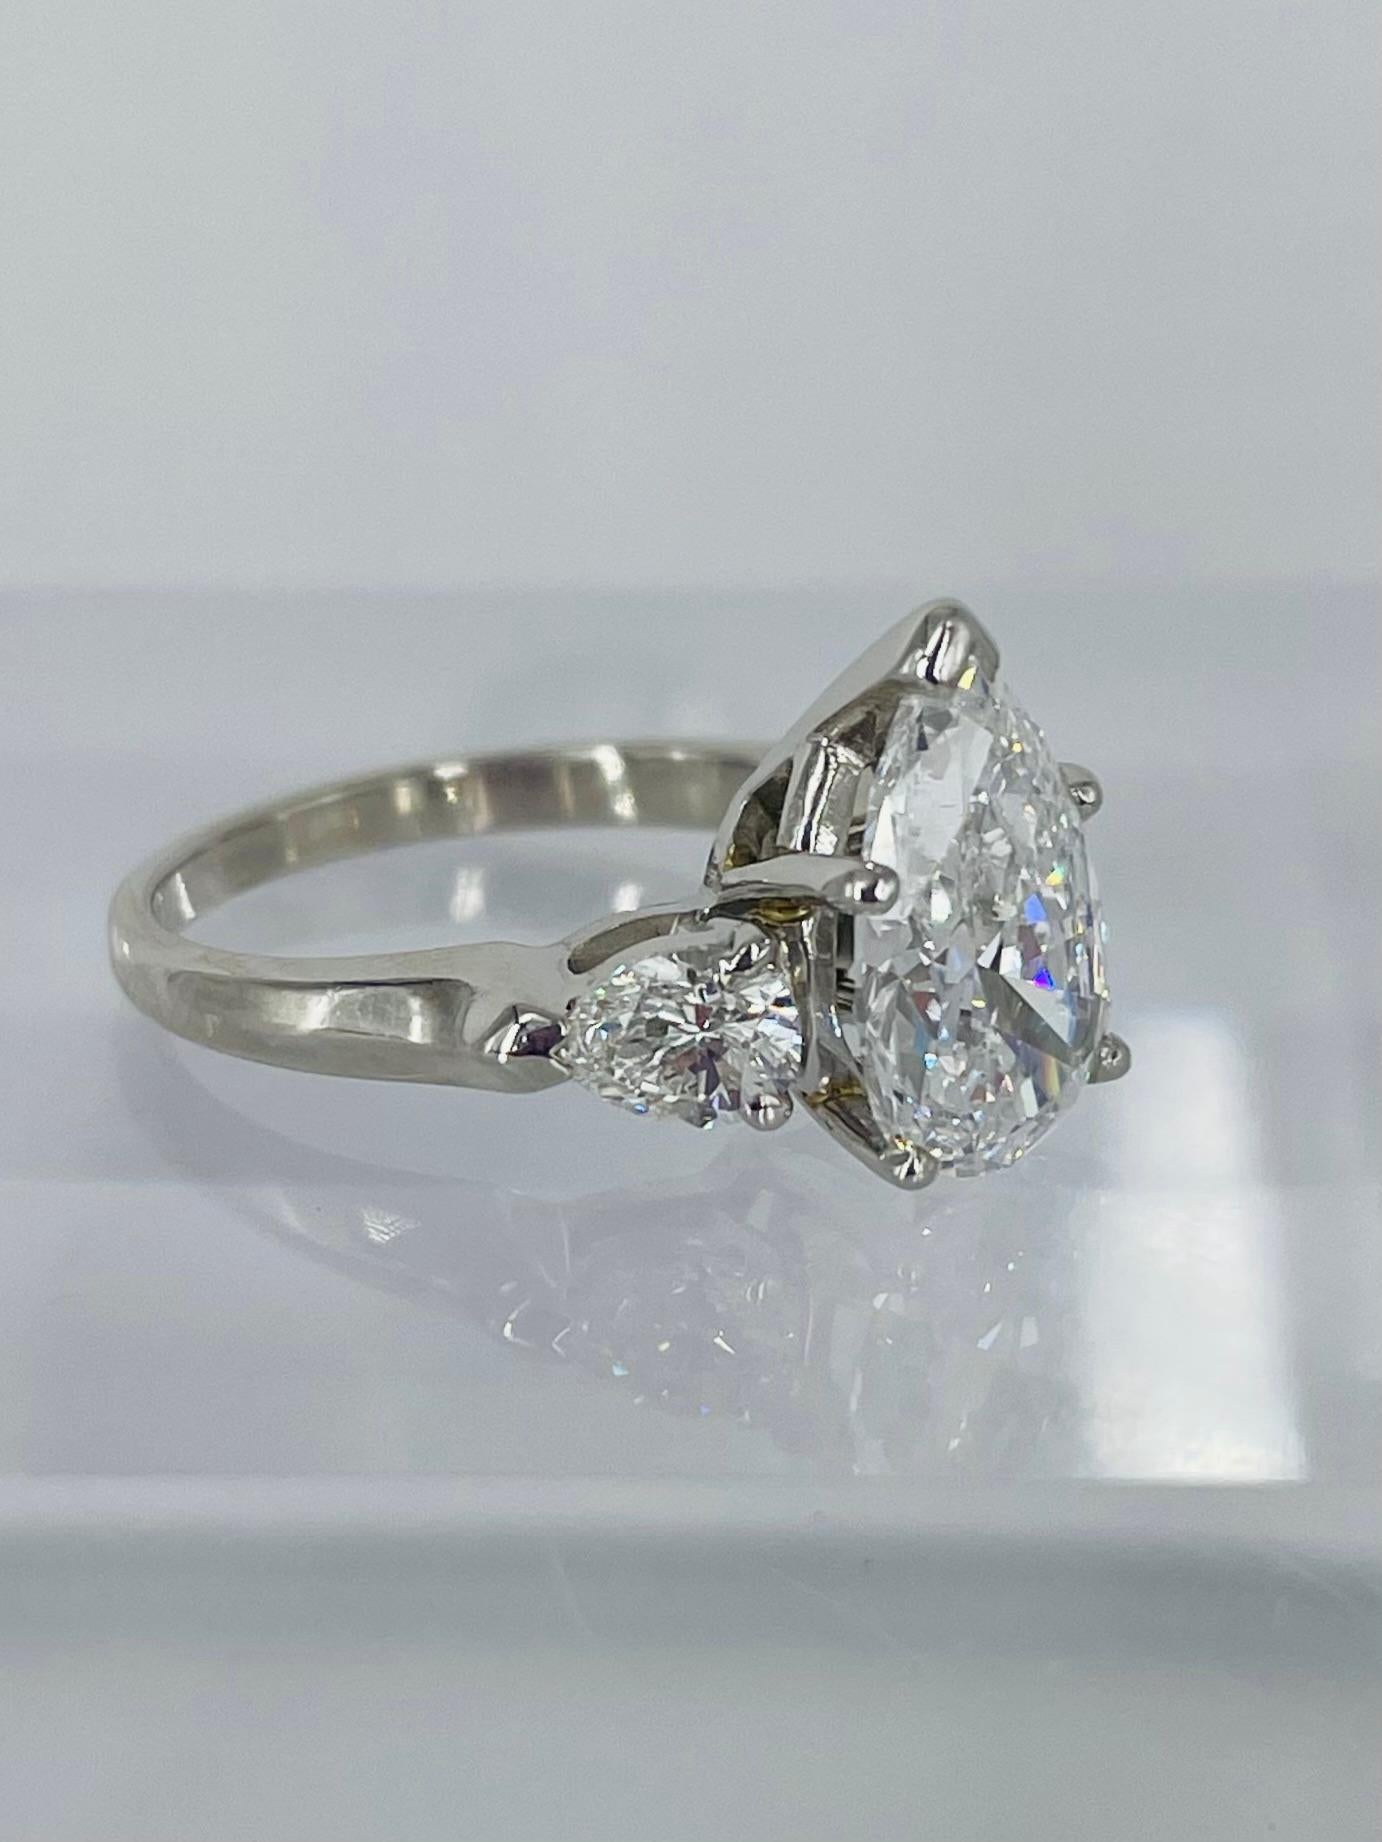 This sweet, sparkling ring by J. Birnbach features a beautifully matched trio of pear shaped diamonds. The center diamond is a GIA certified 2.18 carat pear shape with D color and SI2 clarity. D is the highest possible color grade, which makes this